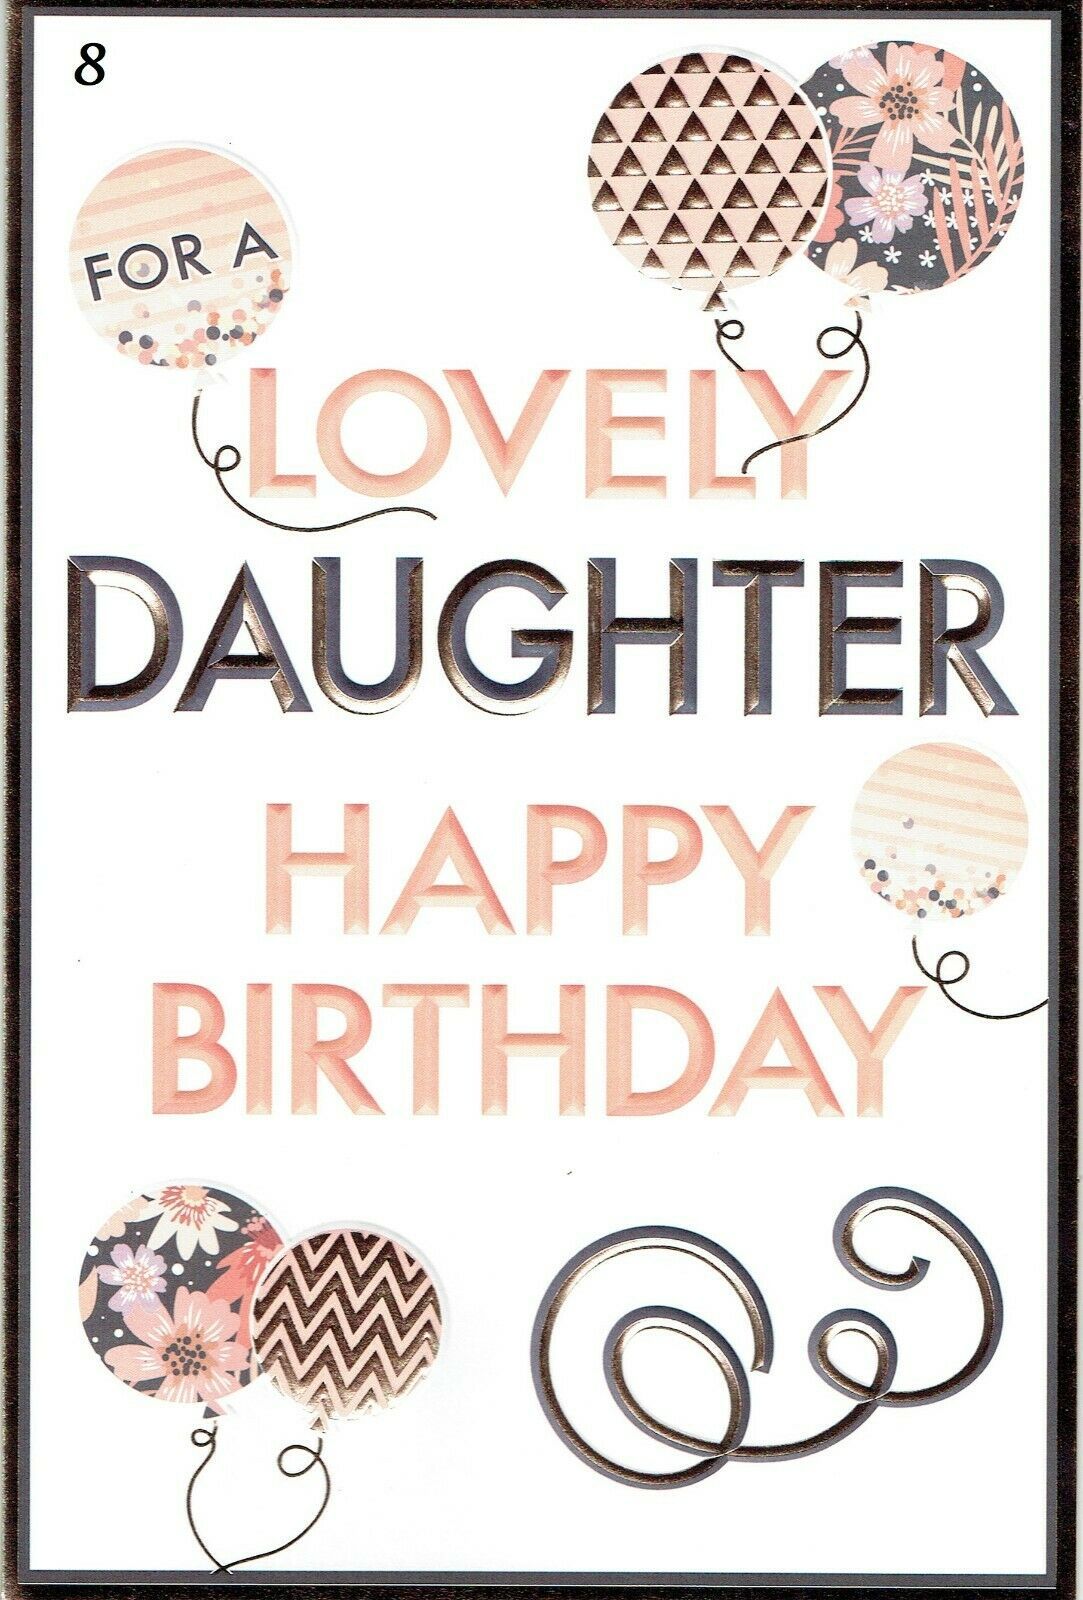 For A Lovely Daughter Happy Birthday